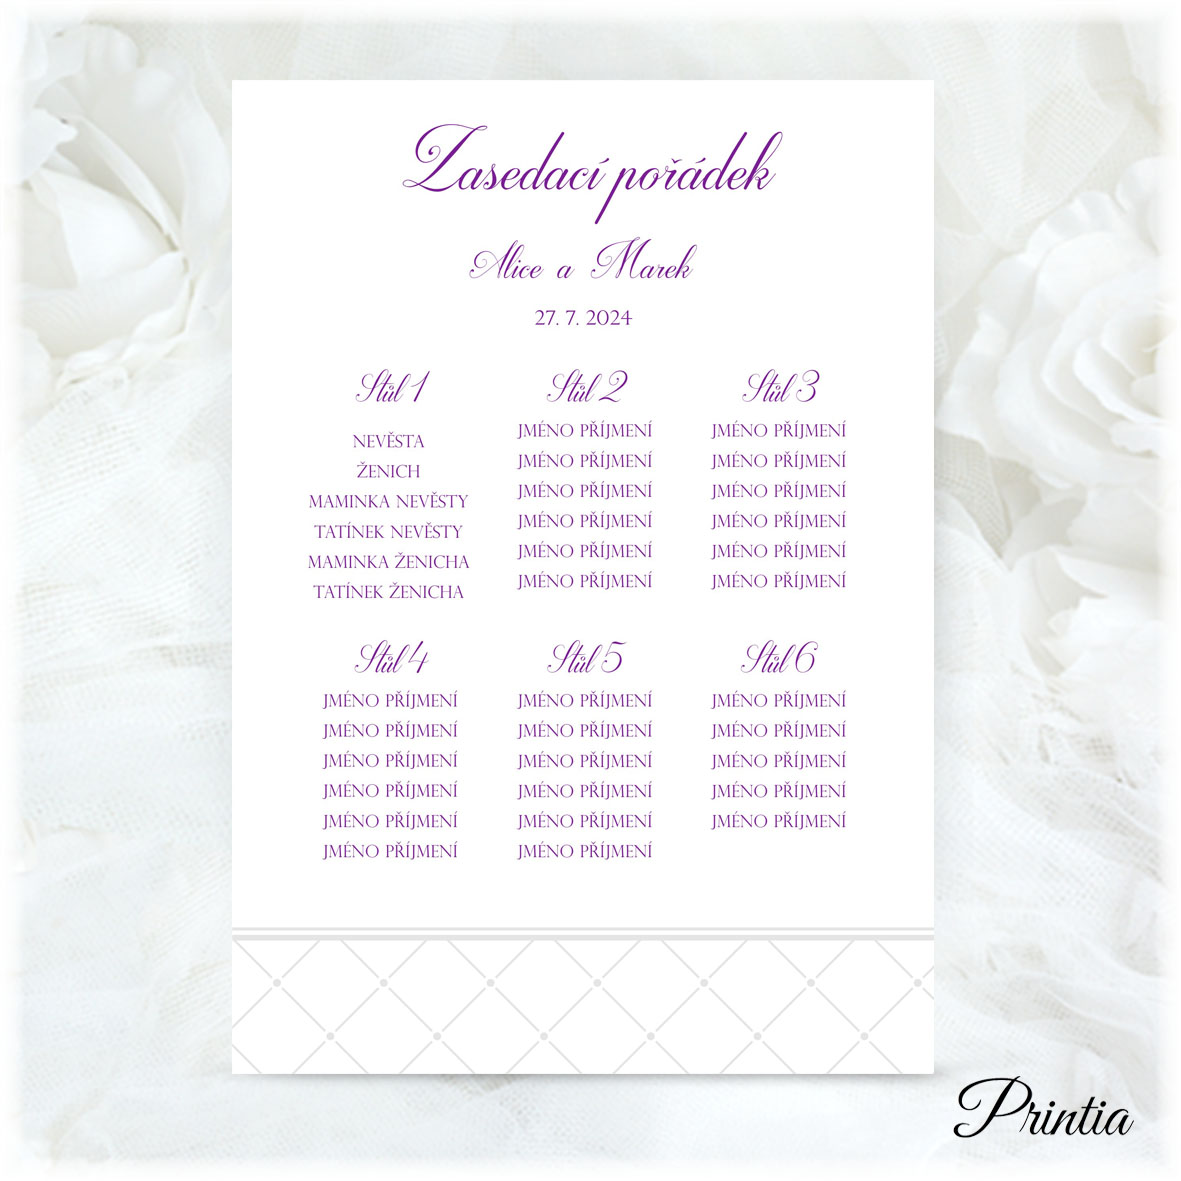 Wedding seating plan with gray ornament